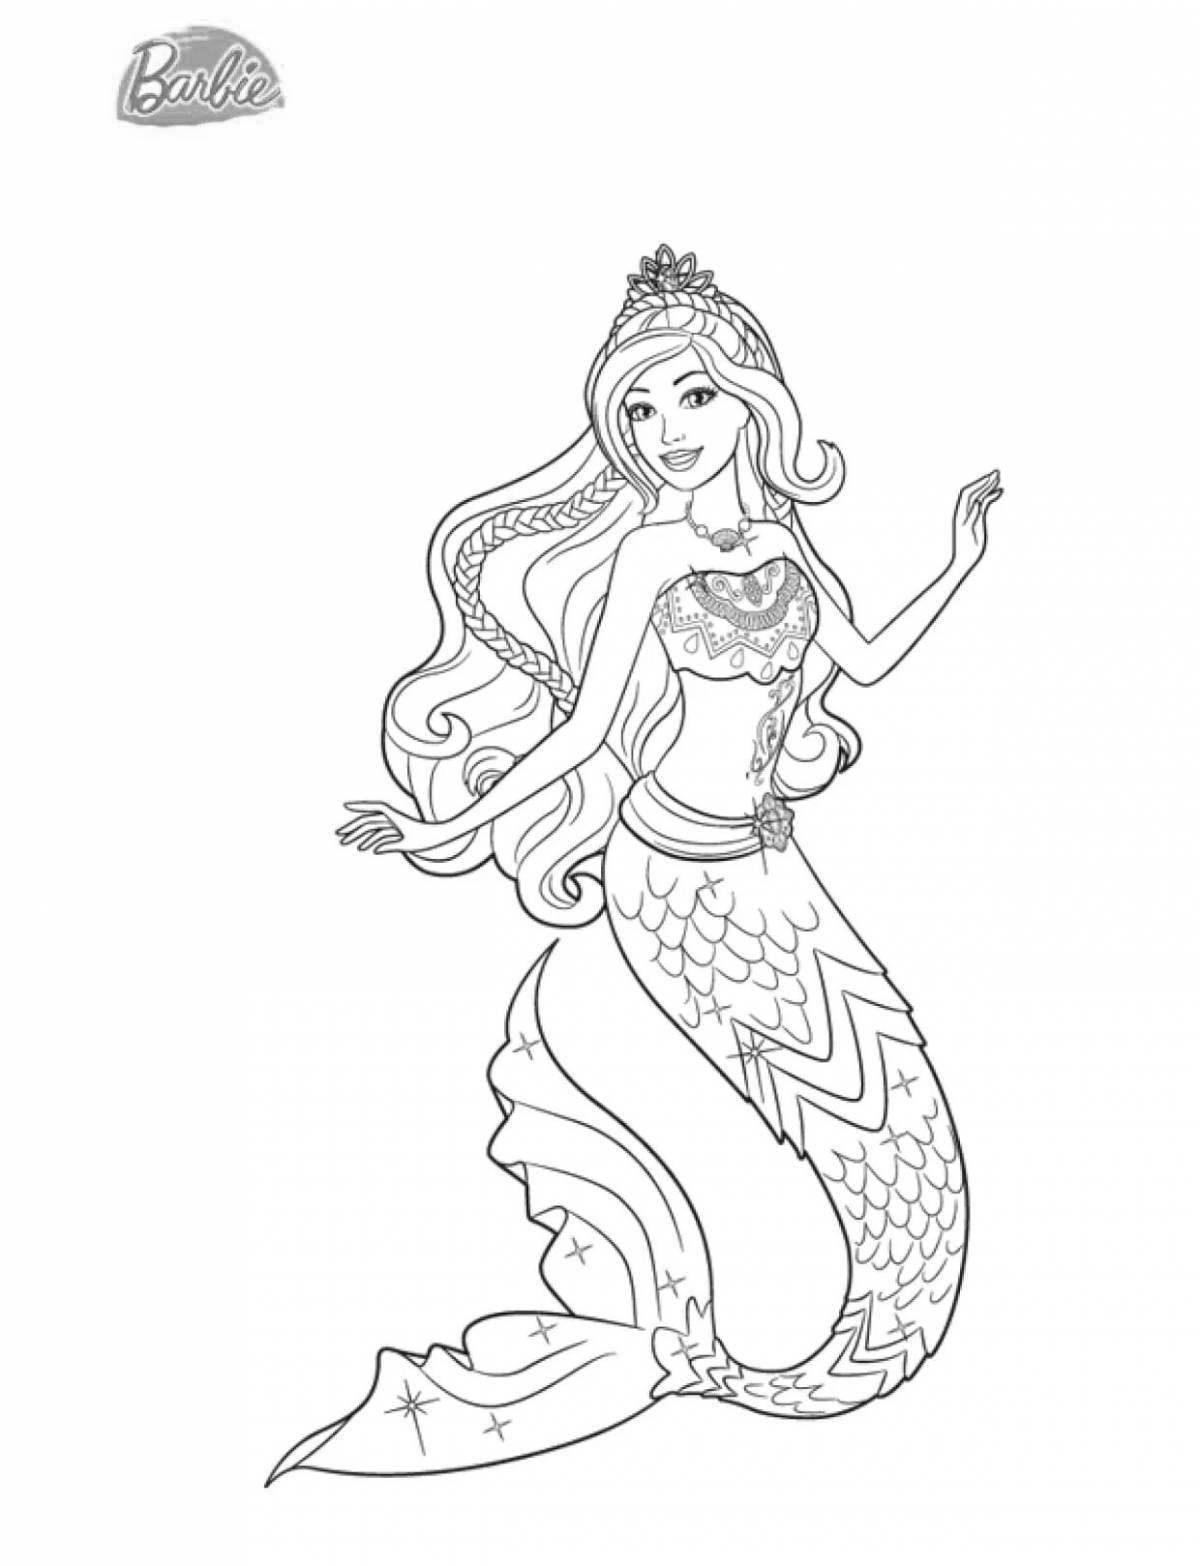 Sublime coloring page кукла барби русалка